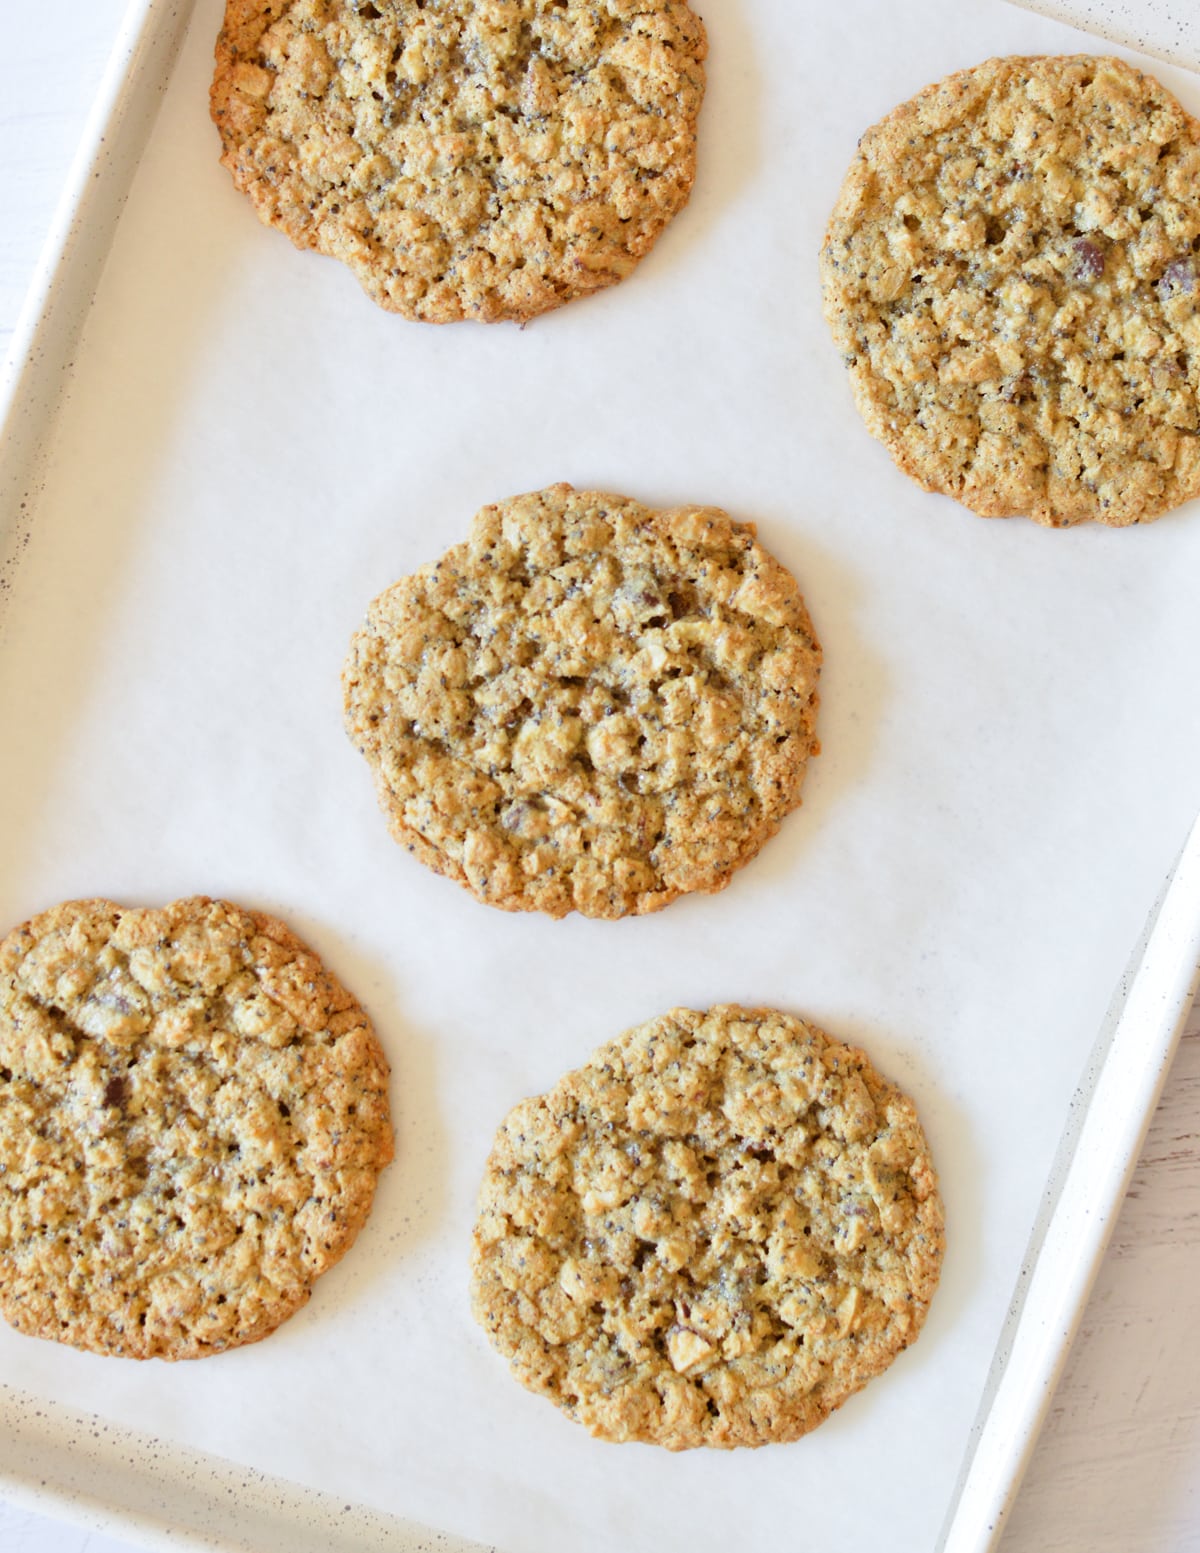 baked oatmeal cookies on a sheet pan.